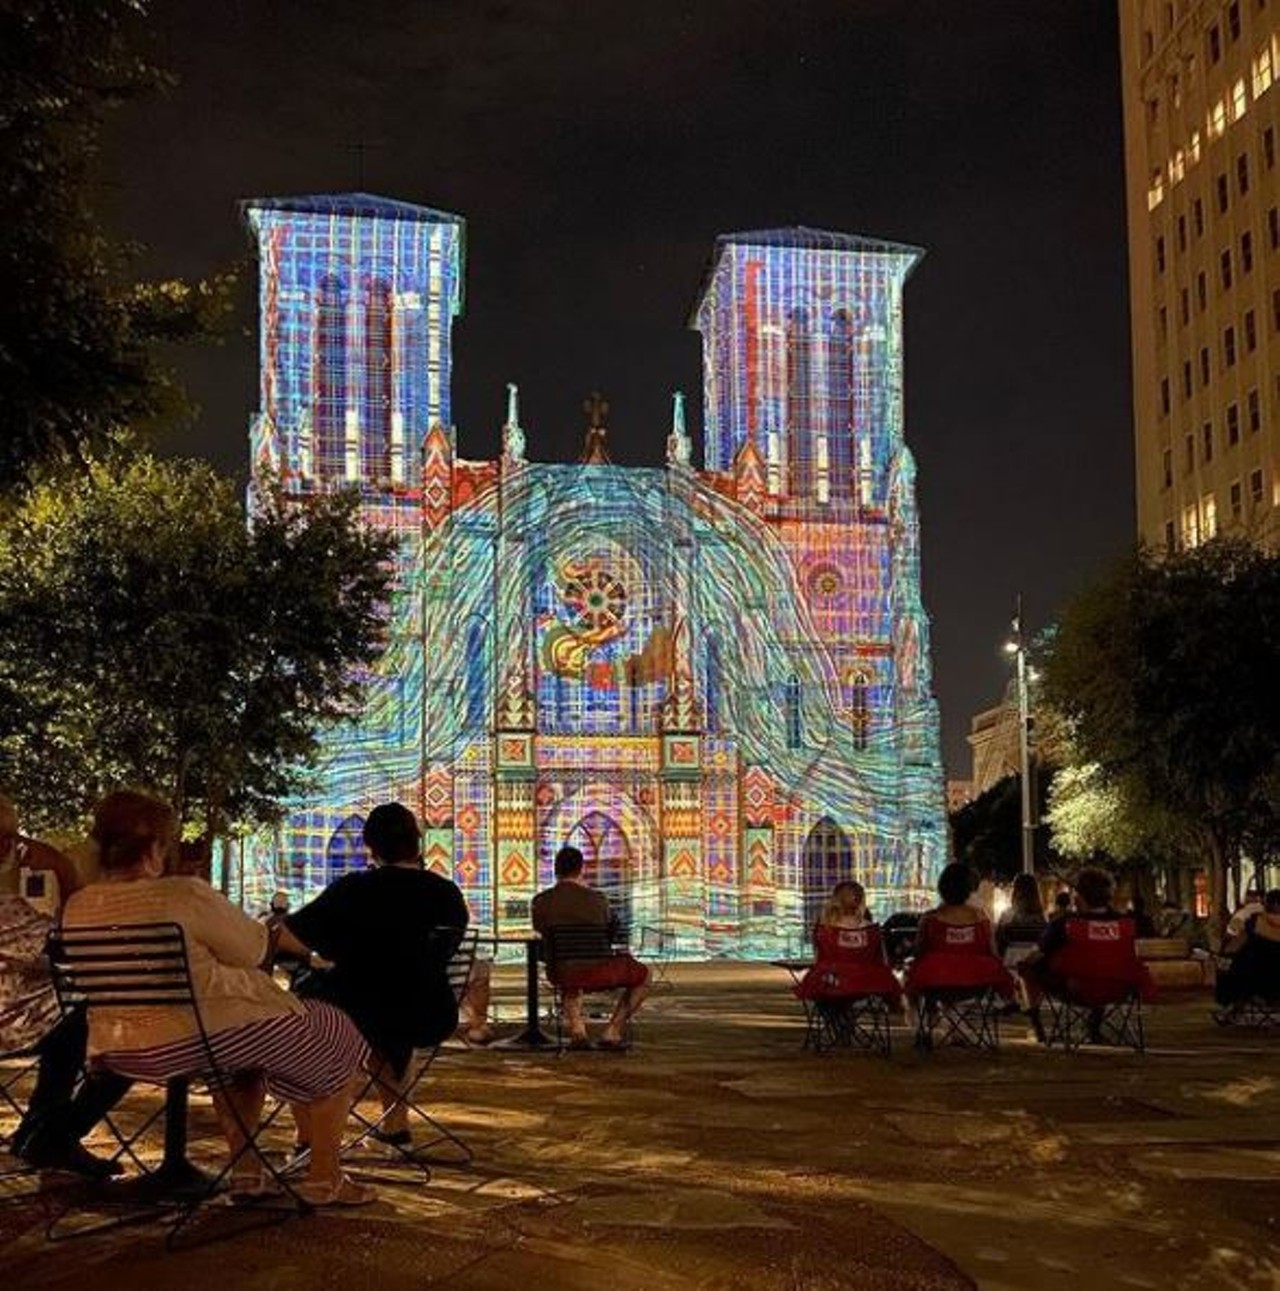 Experience San Antonio: The Saga
115 N Main Ave, (210) 225-9800, mainplaza.org
Vibrant colors and stunning visuals take over the side of San Antonio’s beloved San Fernando Cathedral in this free show, open to the public. In just 24 minutes, French artist Xavier de Richemont’s video art projection takes viewers through the historical discovery, settlement and development of San Antonio.
Photo via Instagram / zach_goebel